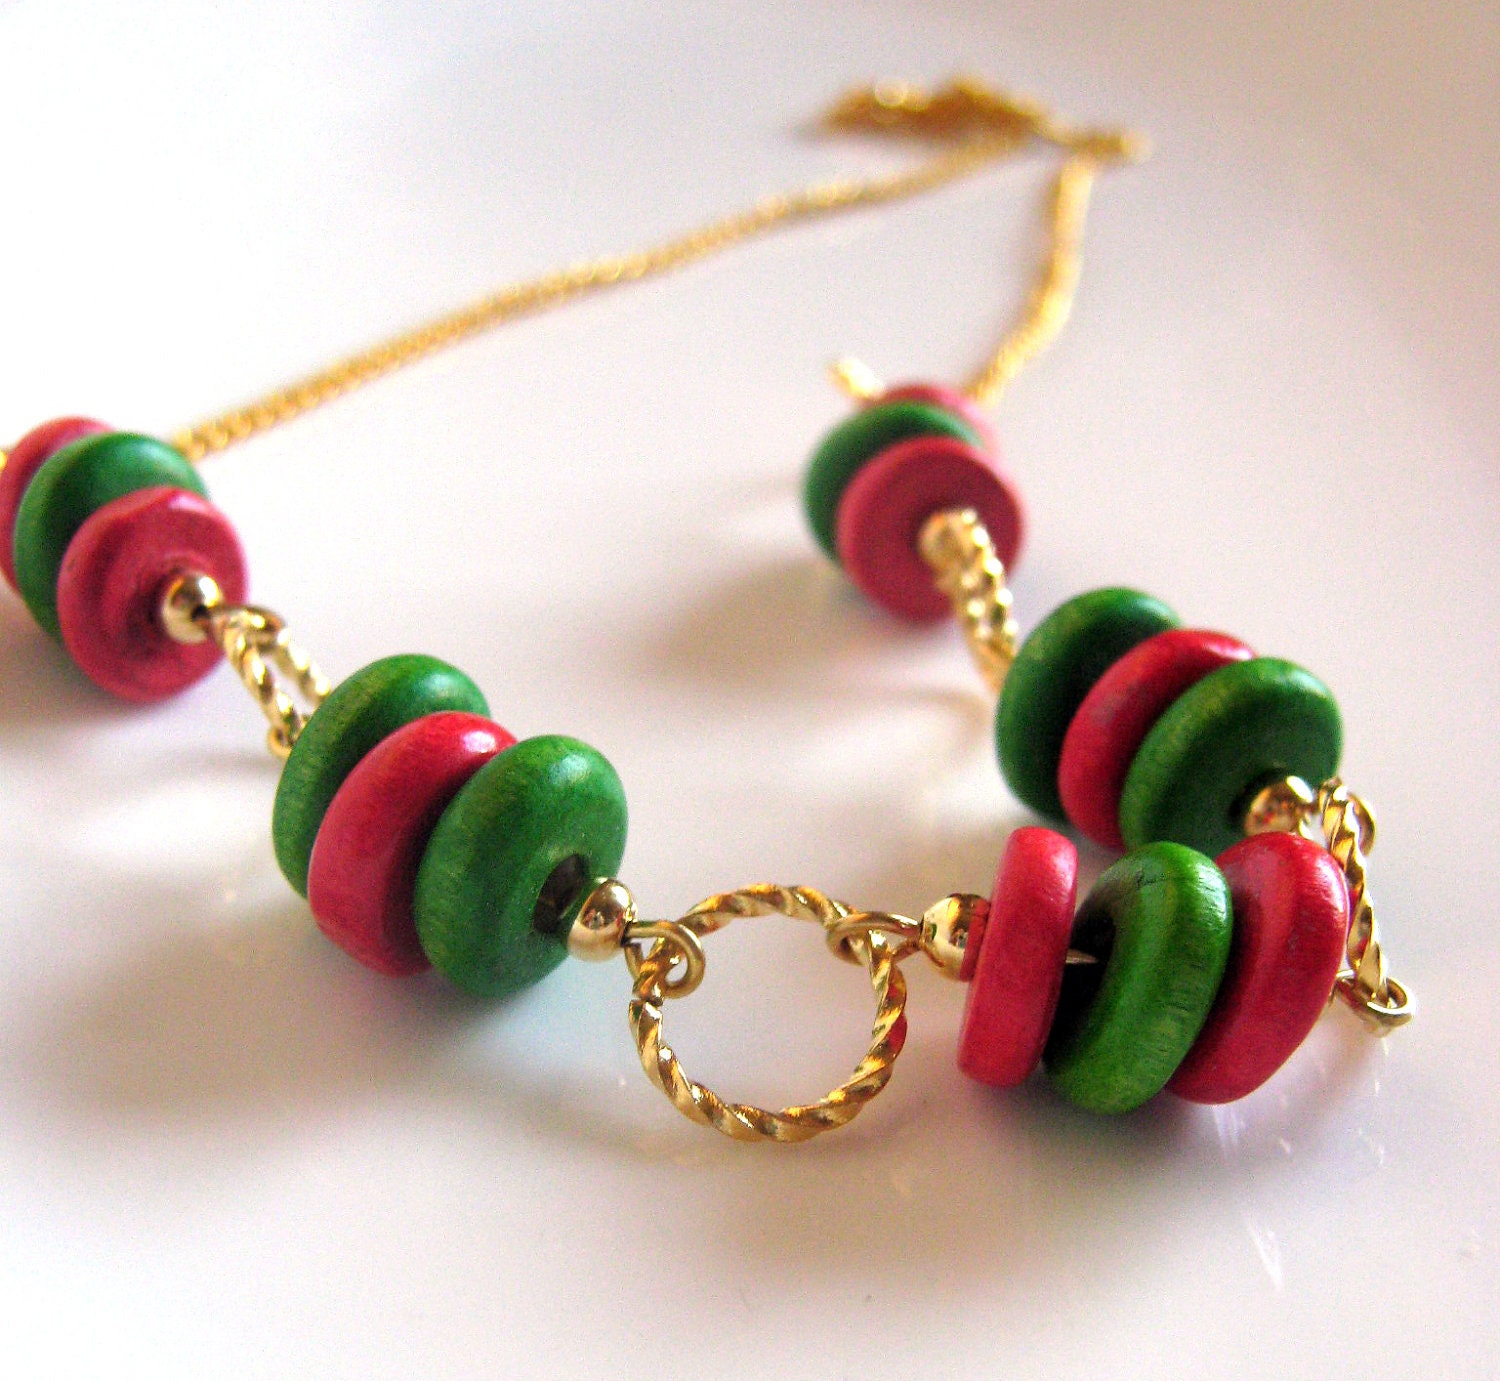 Wooden Christmas necklace - gold red and green